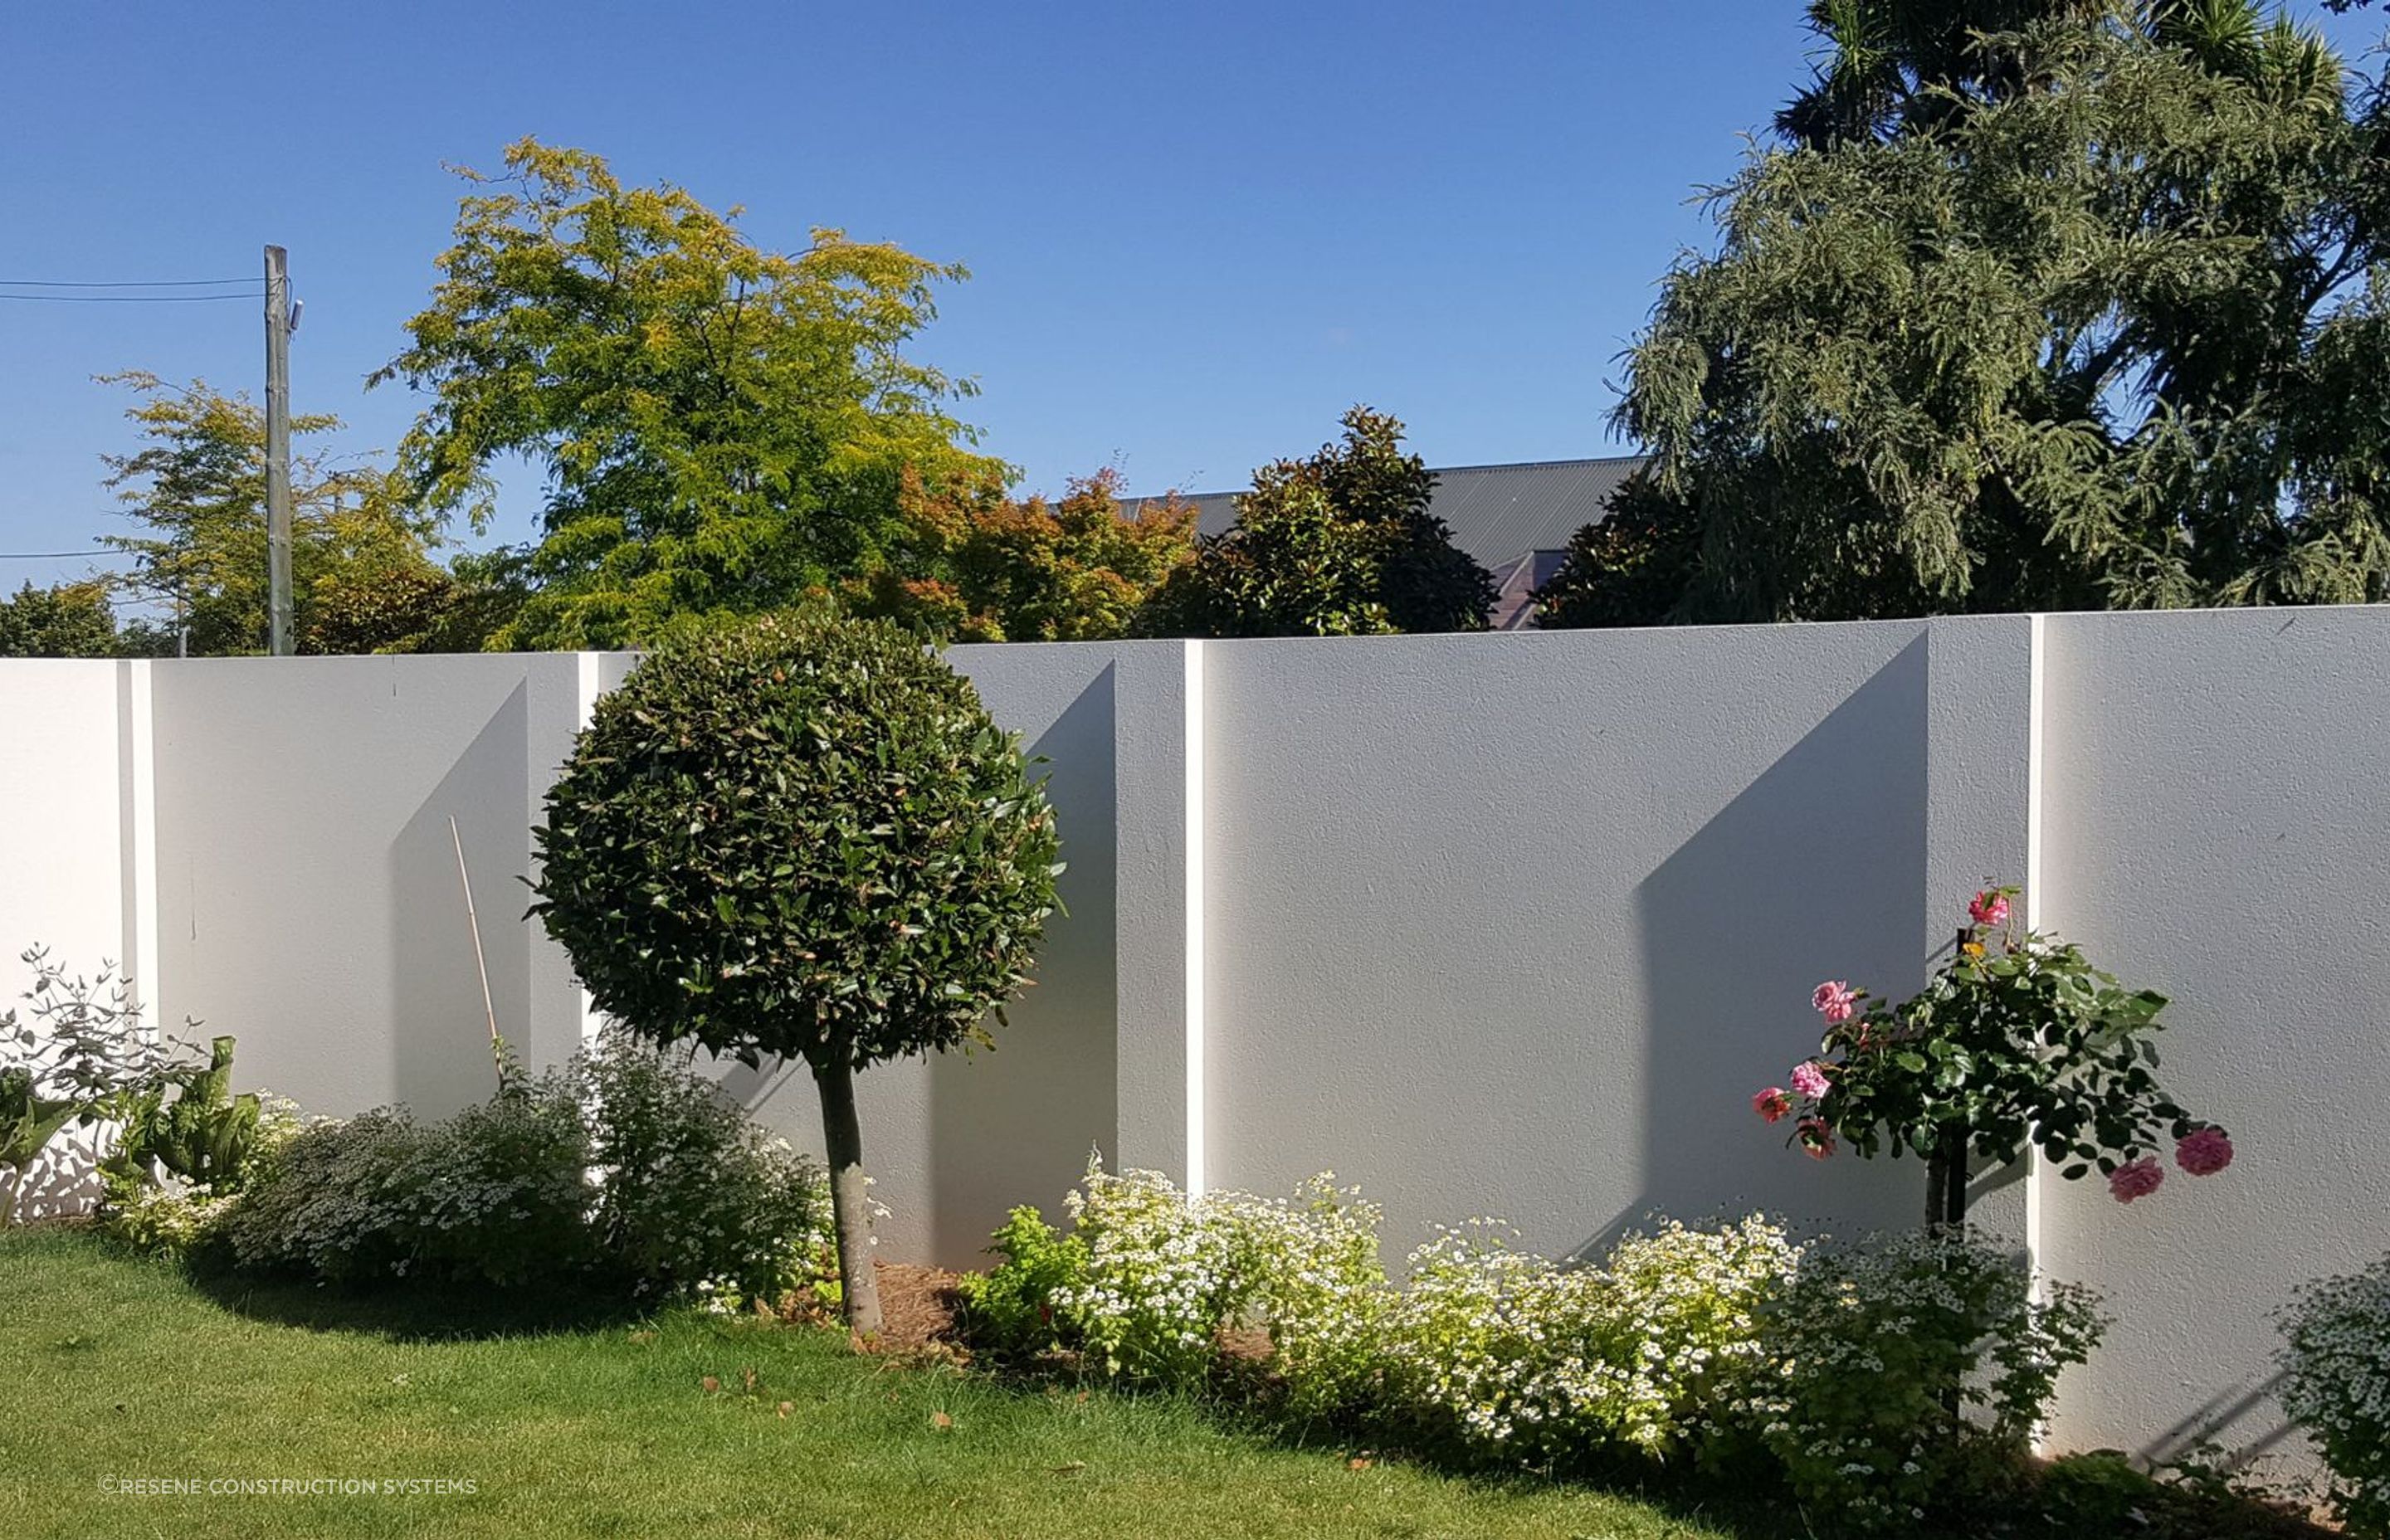 The Integra Lightweight Concrete Fencing Systems is an innovative solution that is great for security, acoustics and aesthetics.